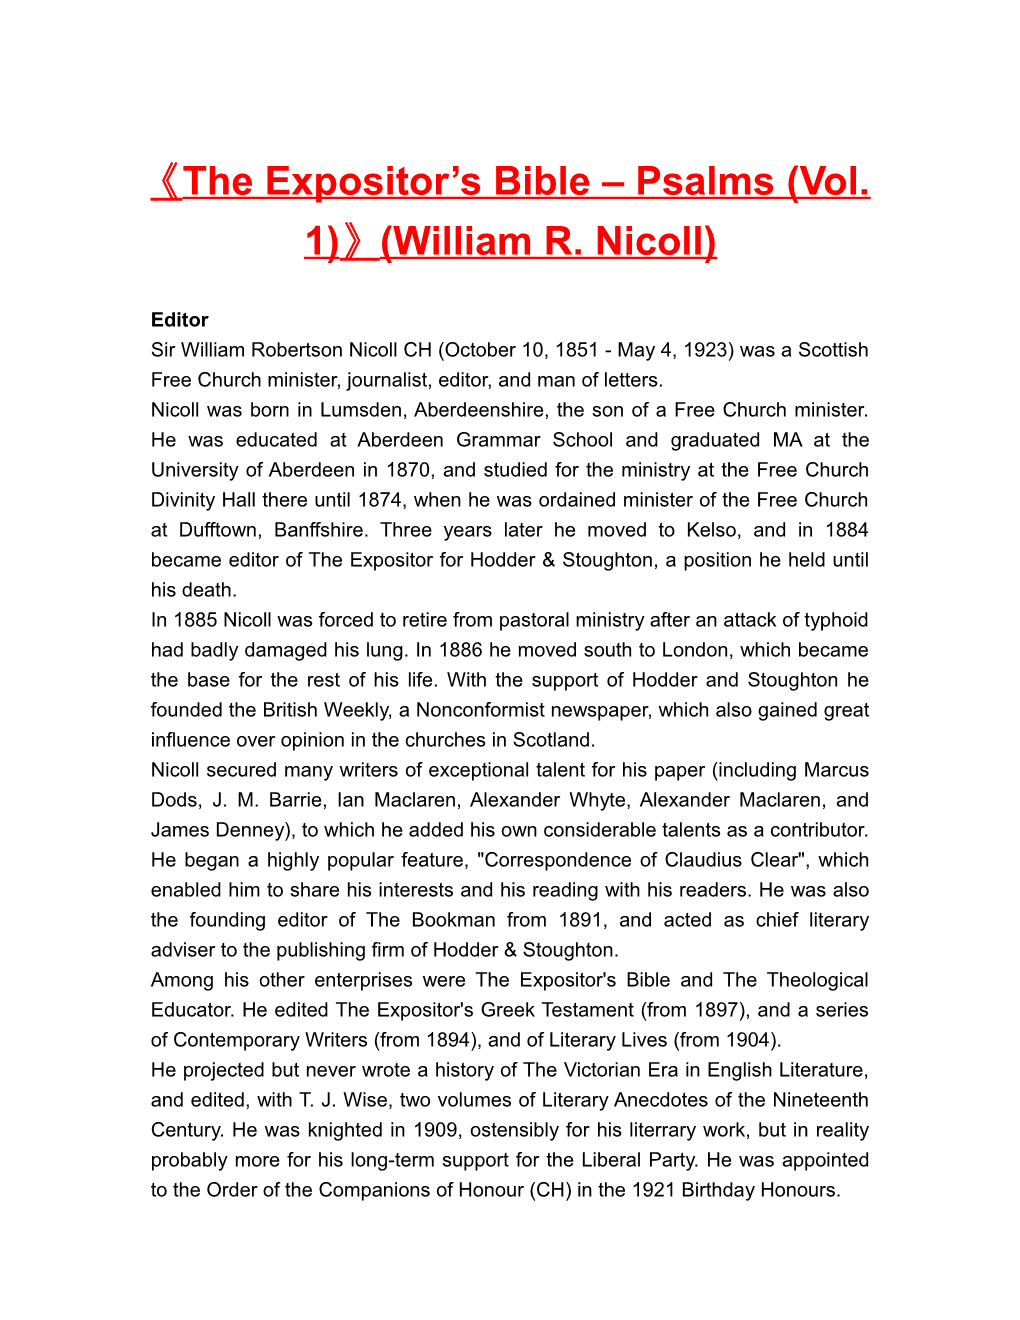 The Expositor S Bible Psalms (Vol. 1) (William R. Nicoll)